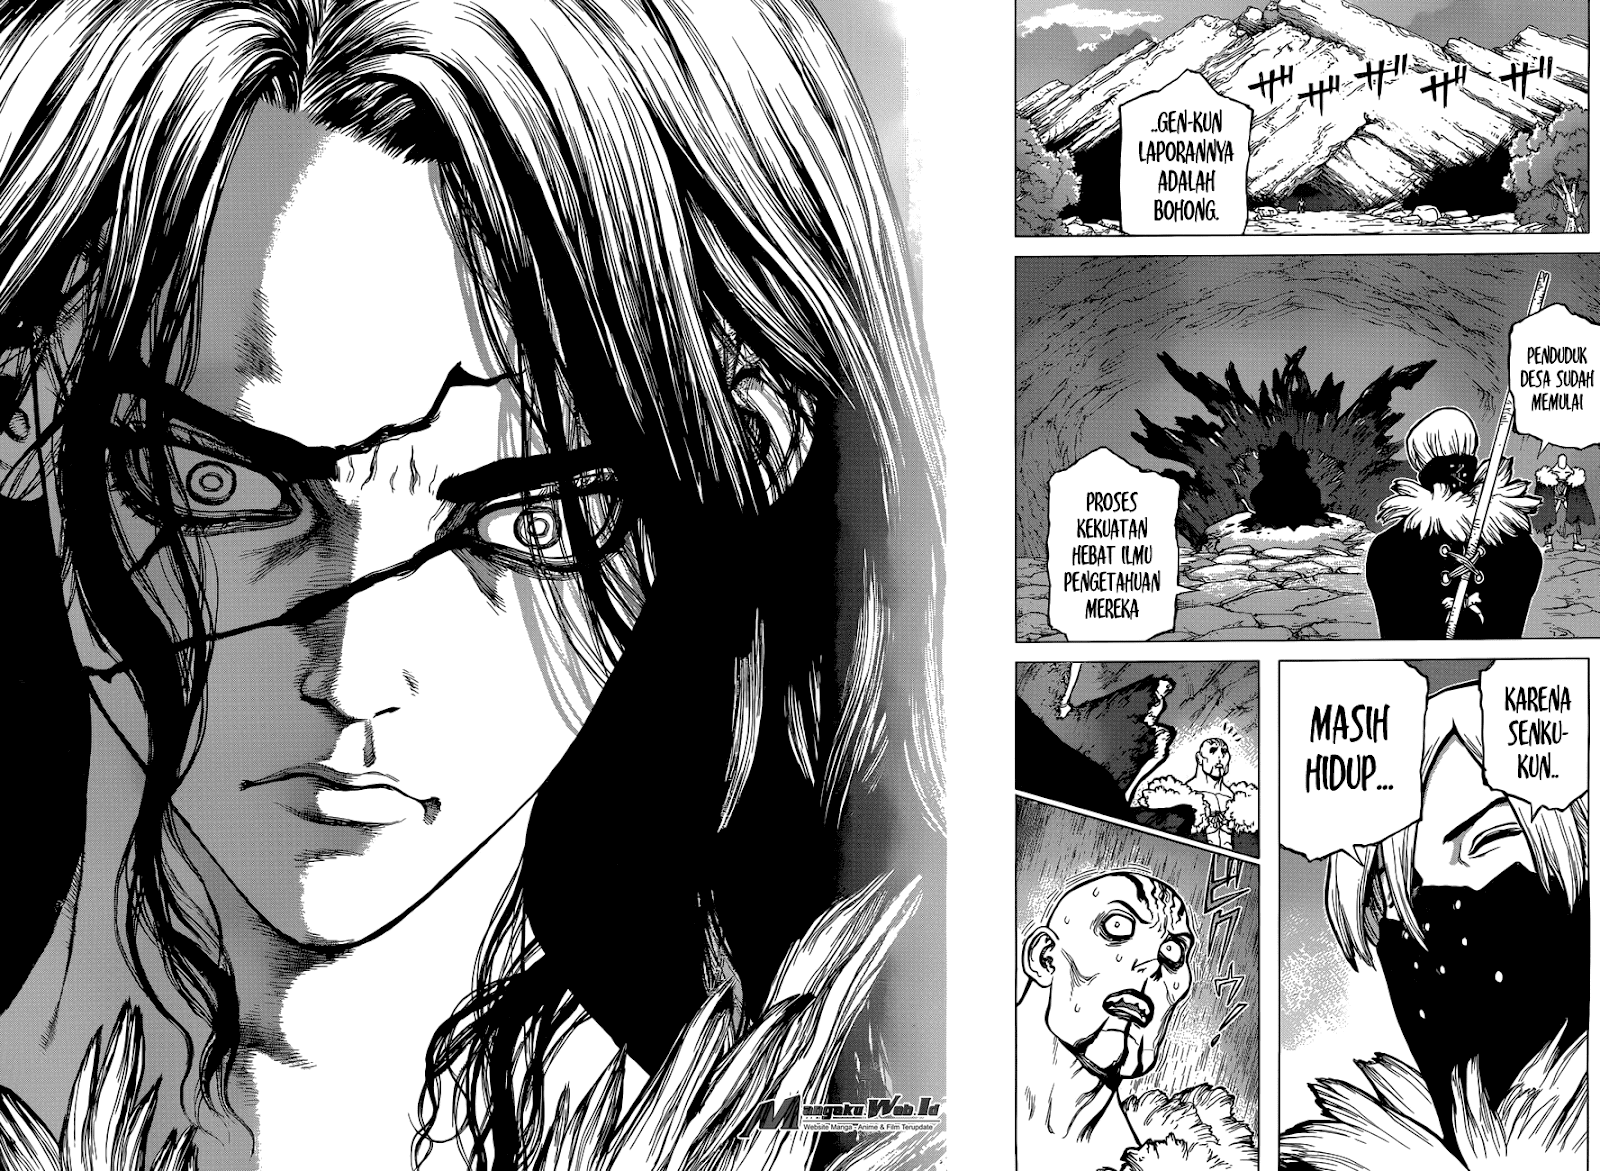 Dr. Stone Chapter 50